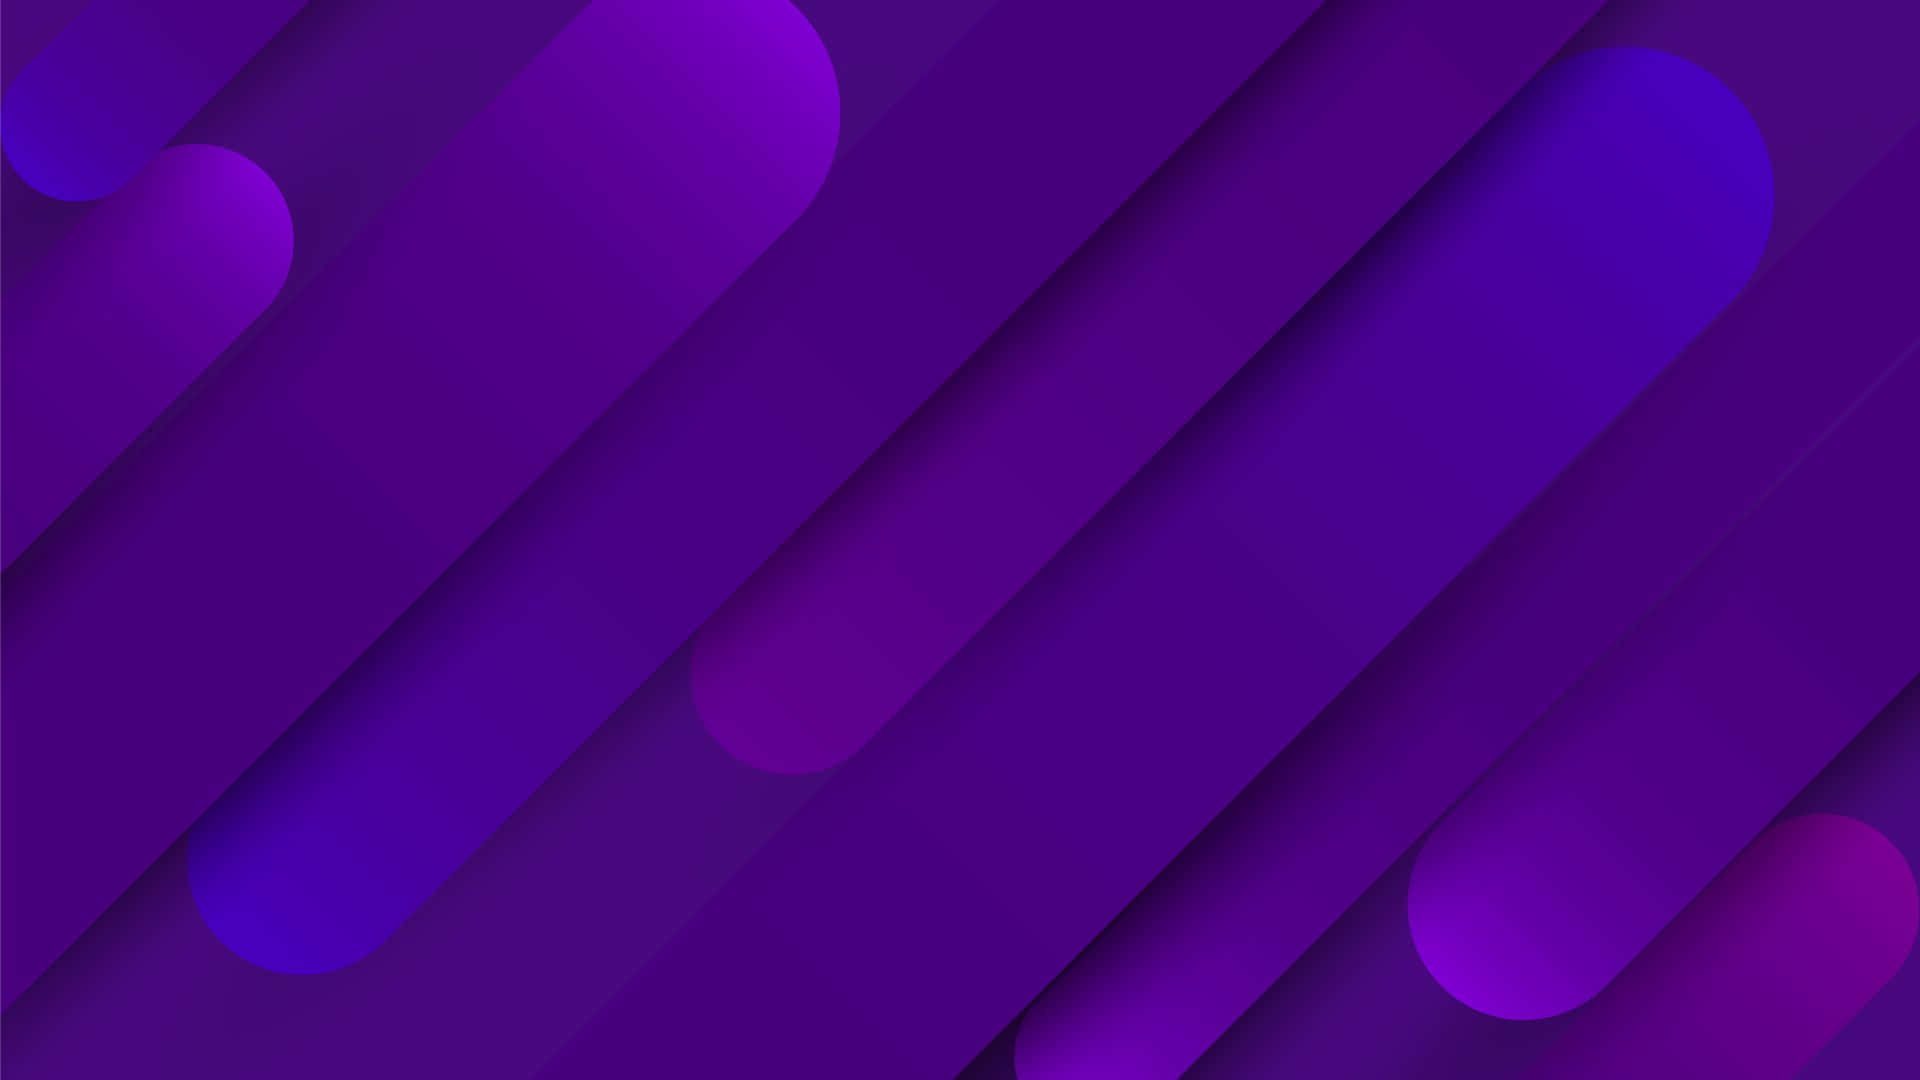 Pretty Purple Background: A Stunning Abstract Design